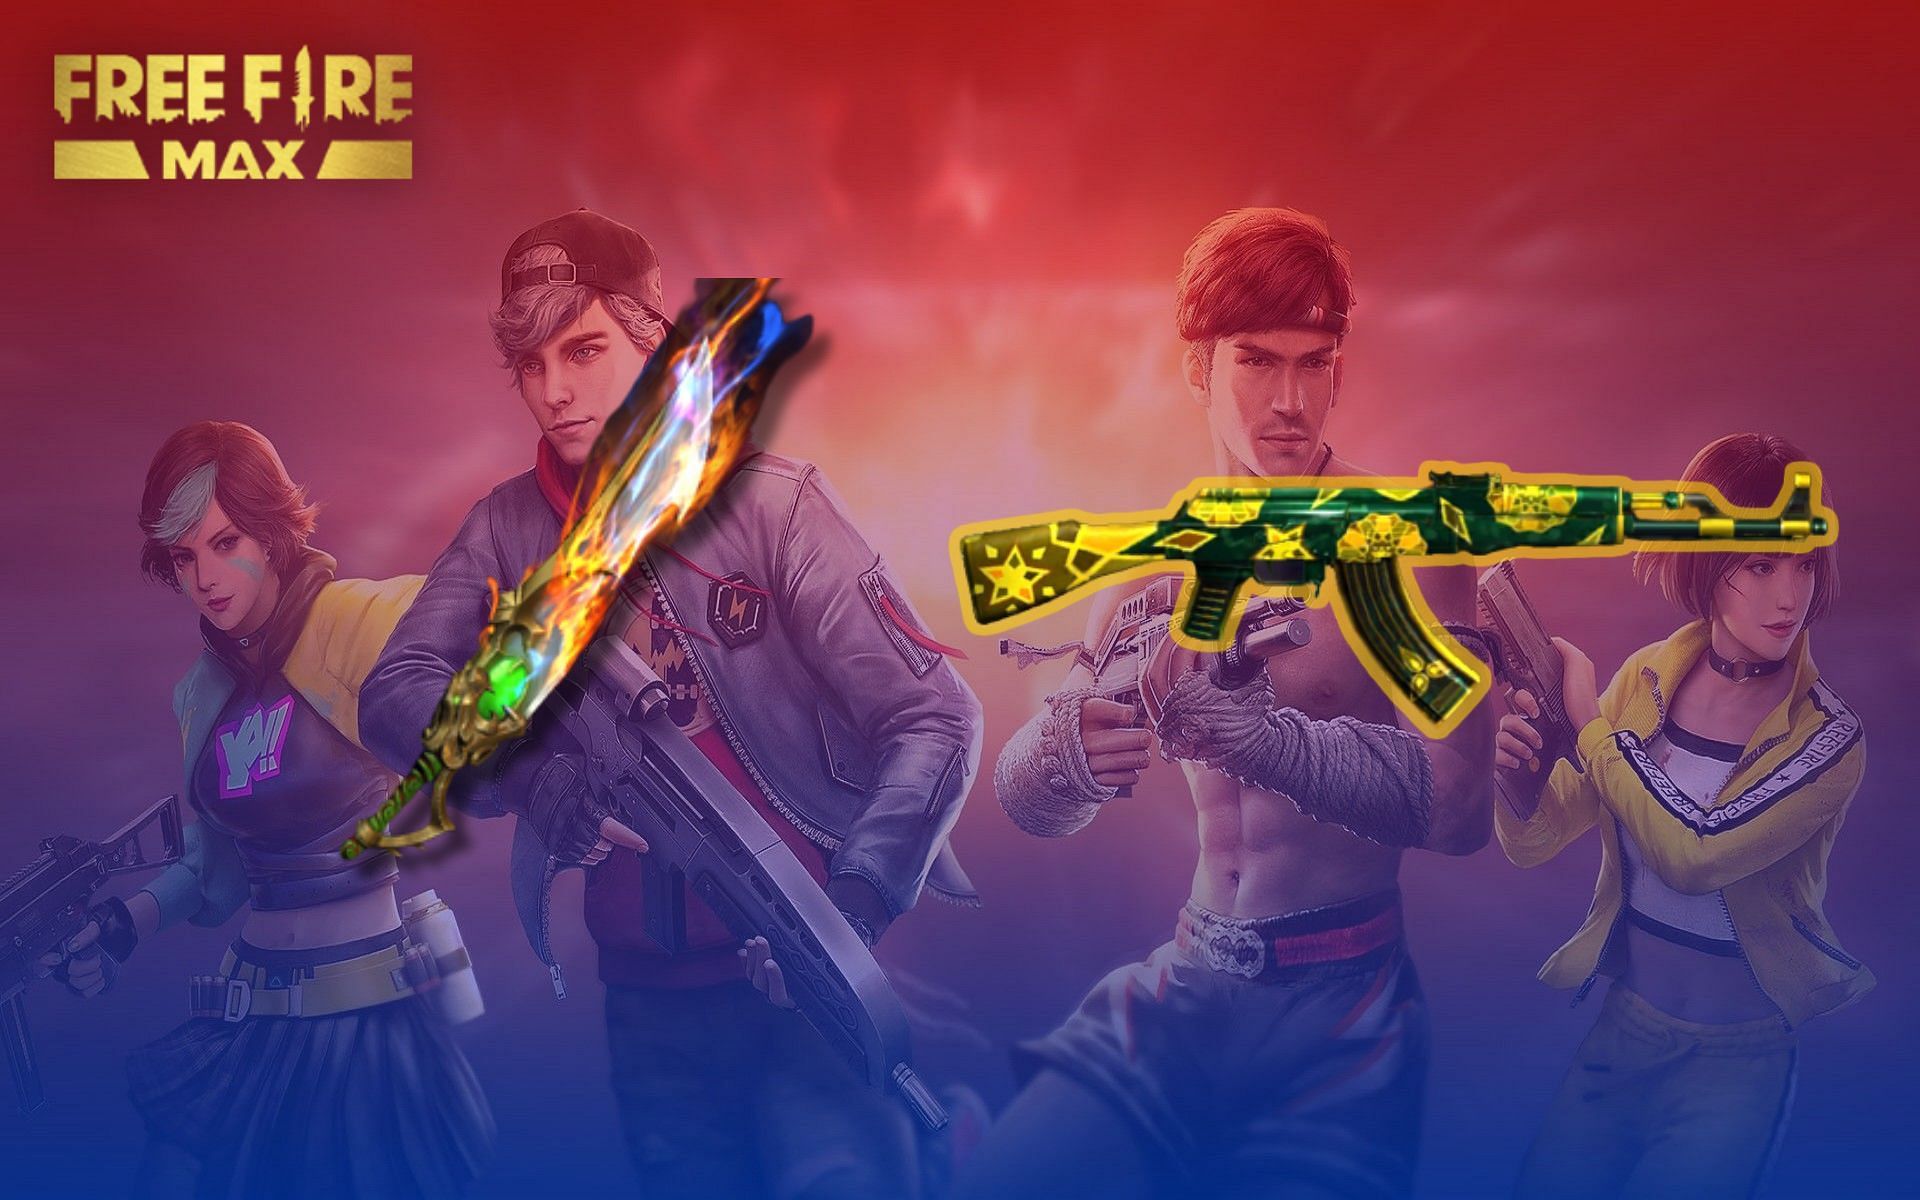 These are among the two rewards available in Free Fire MAX (Image via Sportskeeda)